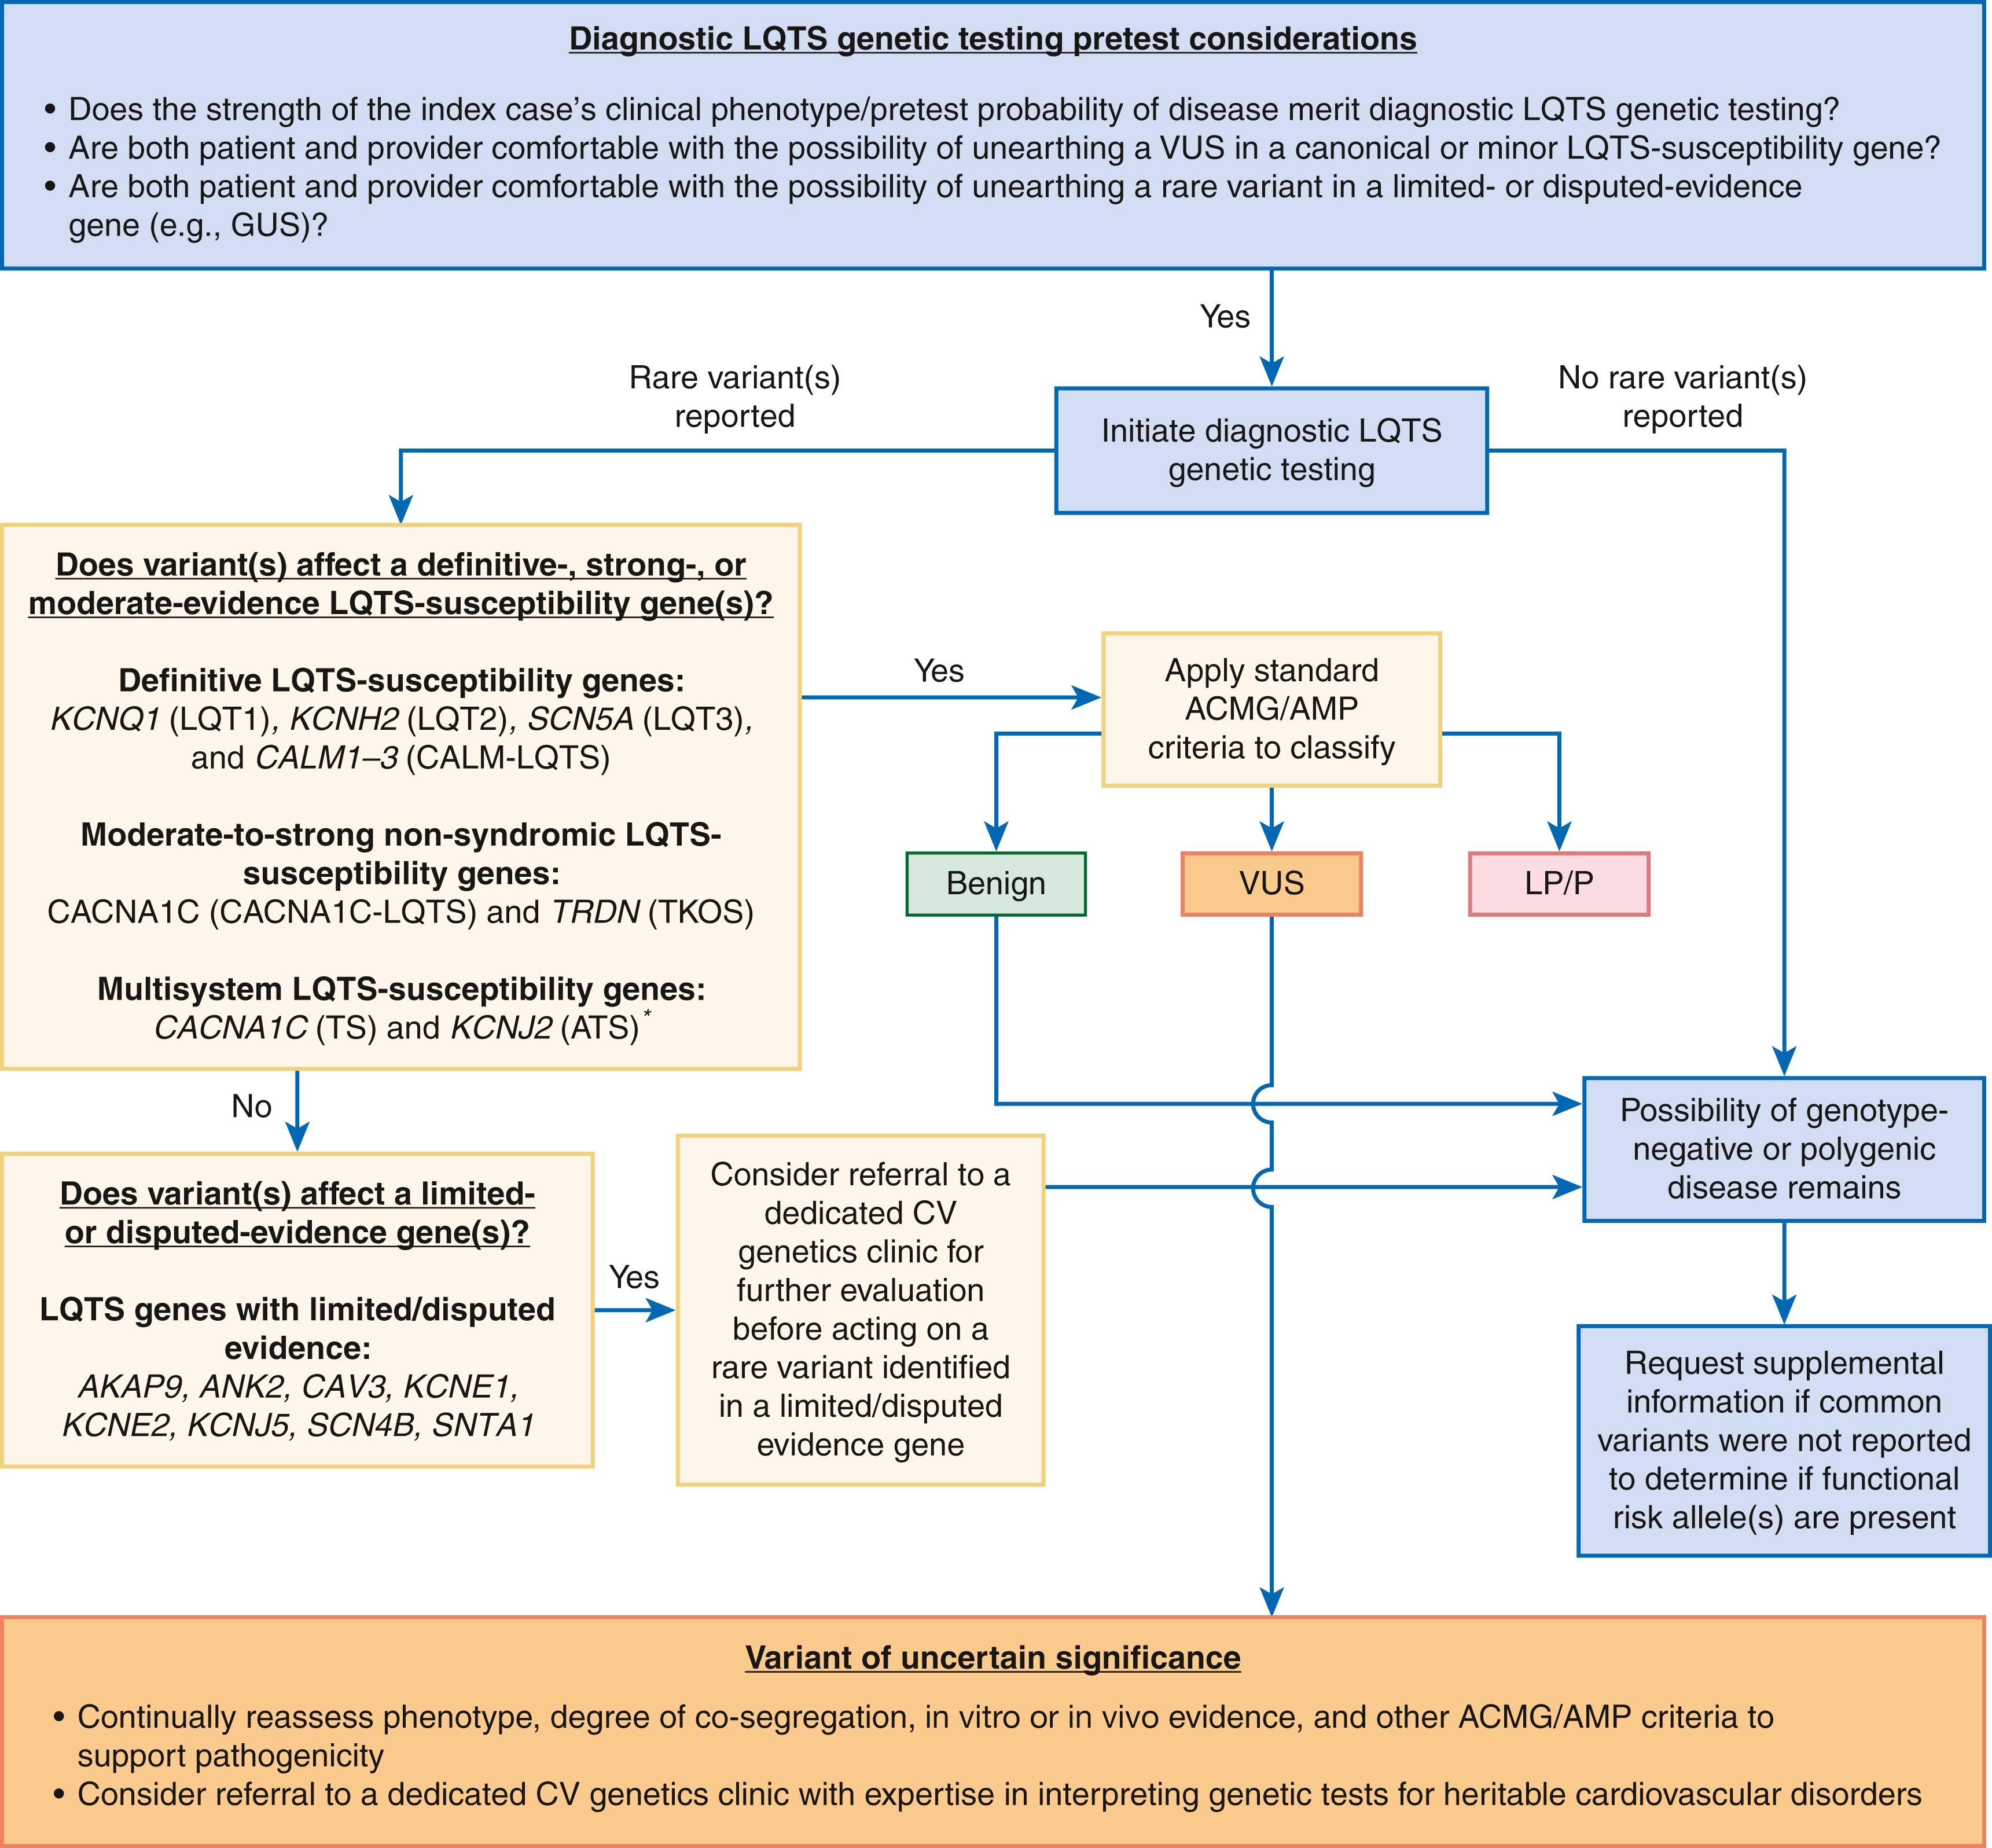 FIGURE 63.3, A rational approach to long QT syndrome genetic testing initiation and interpretation. Blue boxes denote basic considerations pertaining to the initiation of long QT syndrome genetic testing. Light yellow boxes denote a tiered approach to the assessment of rare variants in long QT syndrome-susceptibility genes with variable gene-disease association evidence strength. Orange boxes denote basic considerations pertaining to the identification of rare variants of uncertain significance in self-sufficient long QT syndrome-susceptibility genes that currently lack sufficient evidence to classify as either benign or pathogenic/likely pathogenic. ∗Due to the lack of a true QT prolongation phenotype, the authors recommend against the routine inclusion of KCNJ2 on diagnostic LQTS testing panels. ACMG, American College of Medical Genetics and Genomics; AMP, Association for Molecular Pathology; LP, likely pathogenic; LQTS, long QT syndrome; P, pathogenic; TKOS, triadin knockout syndrome; TS, Timothy syndrome; GUS, gene of uncertain significance; VUS, variant of uncertain significance.